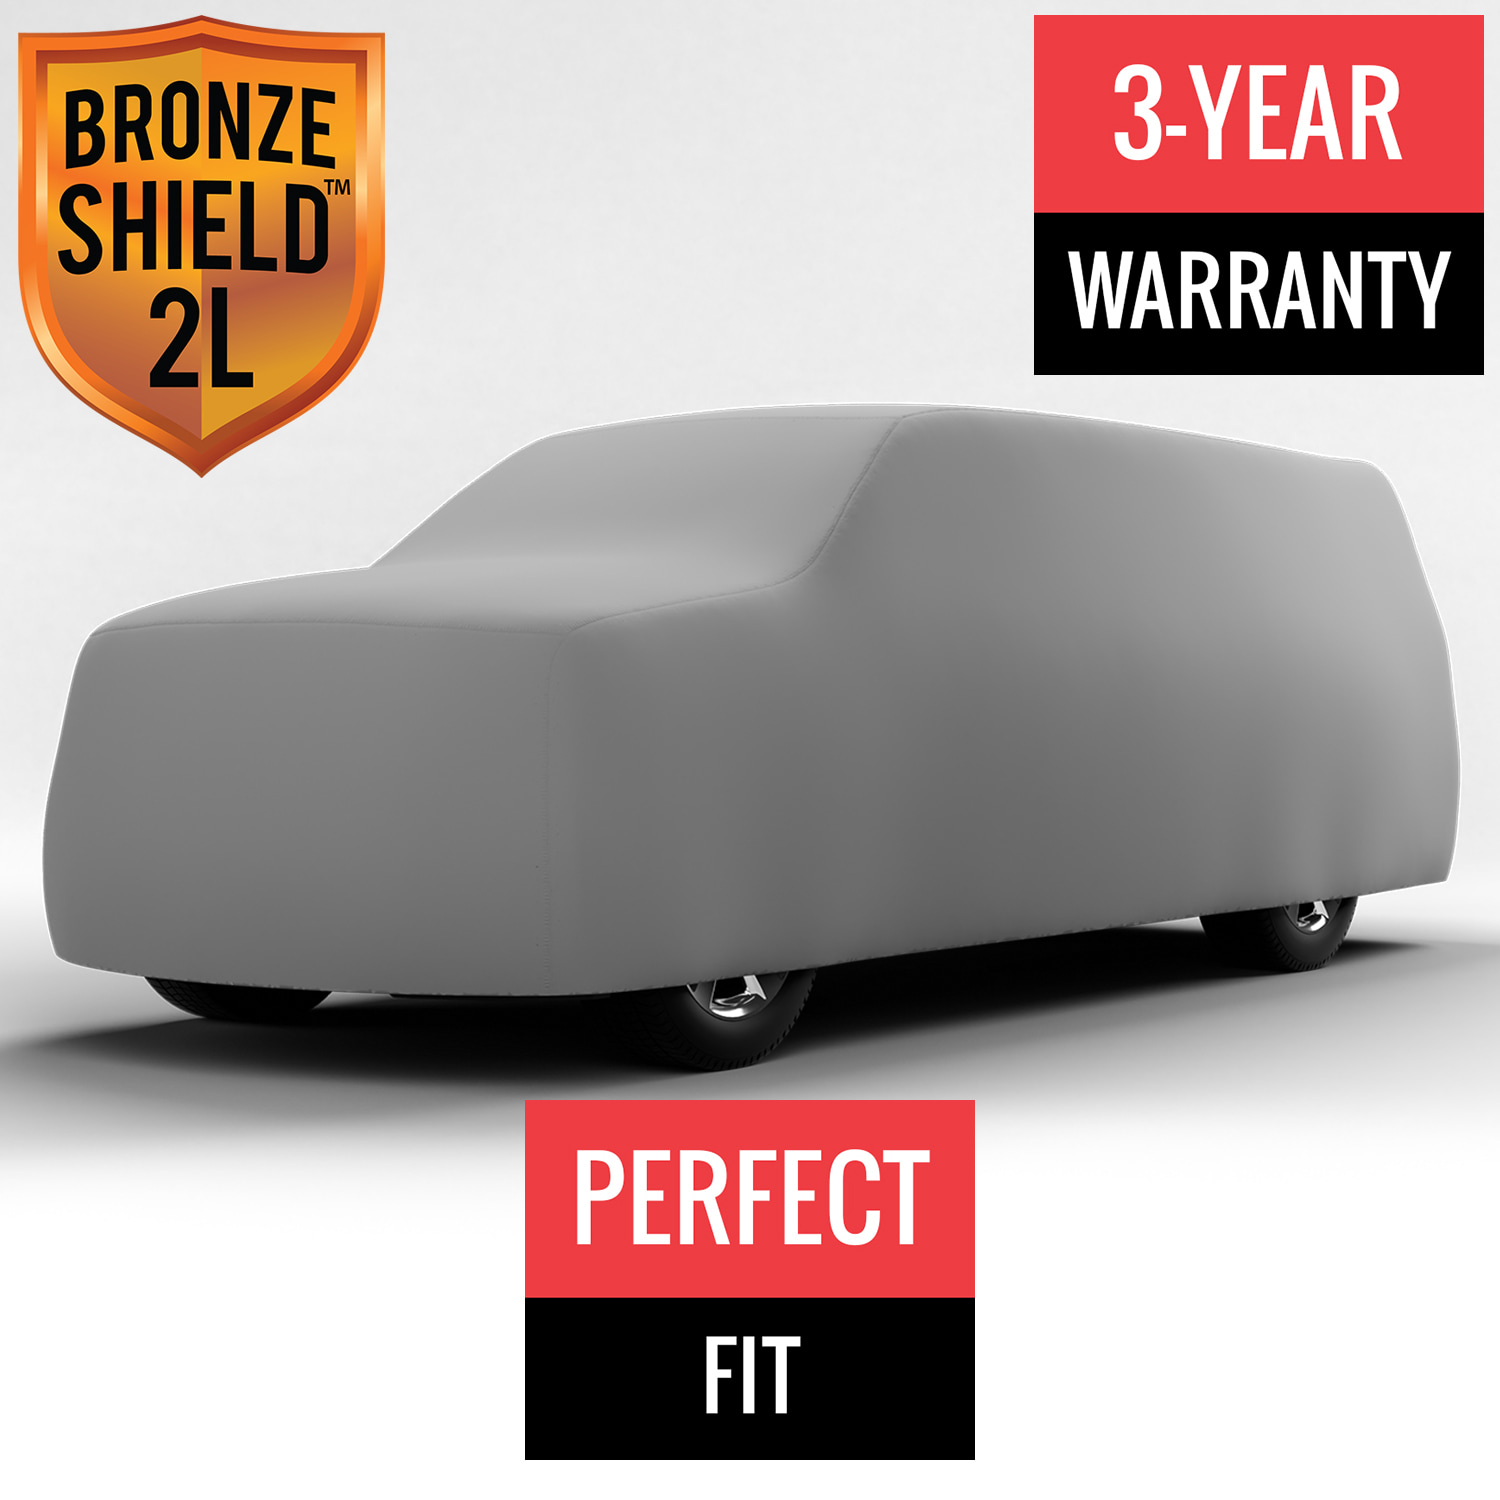 Bronze Shield 2L - Car Cover for Toyota Pickup 1974 Regular Cab Pickup 2-Door Short Bed with Camper Shell